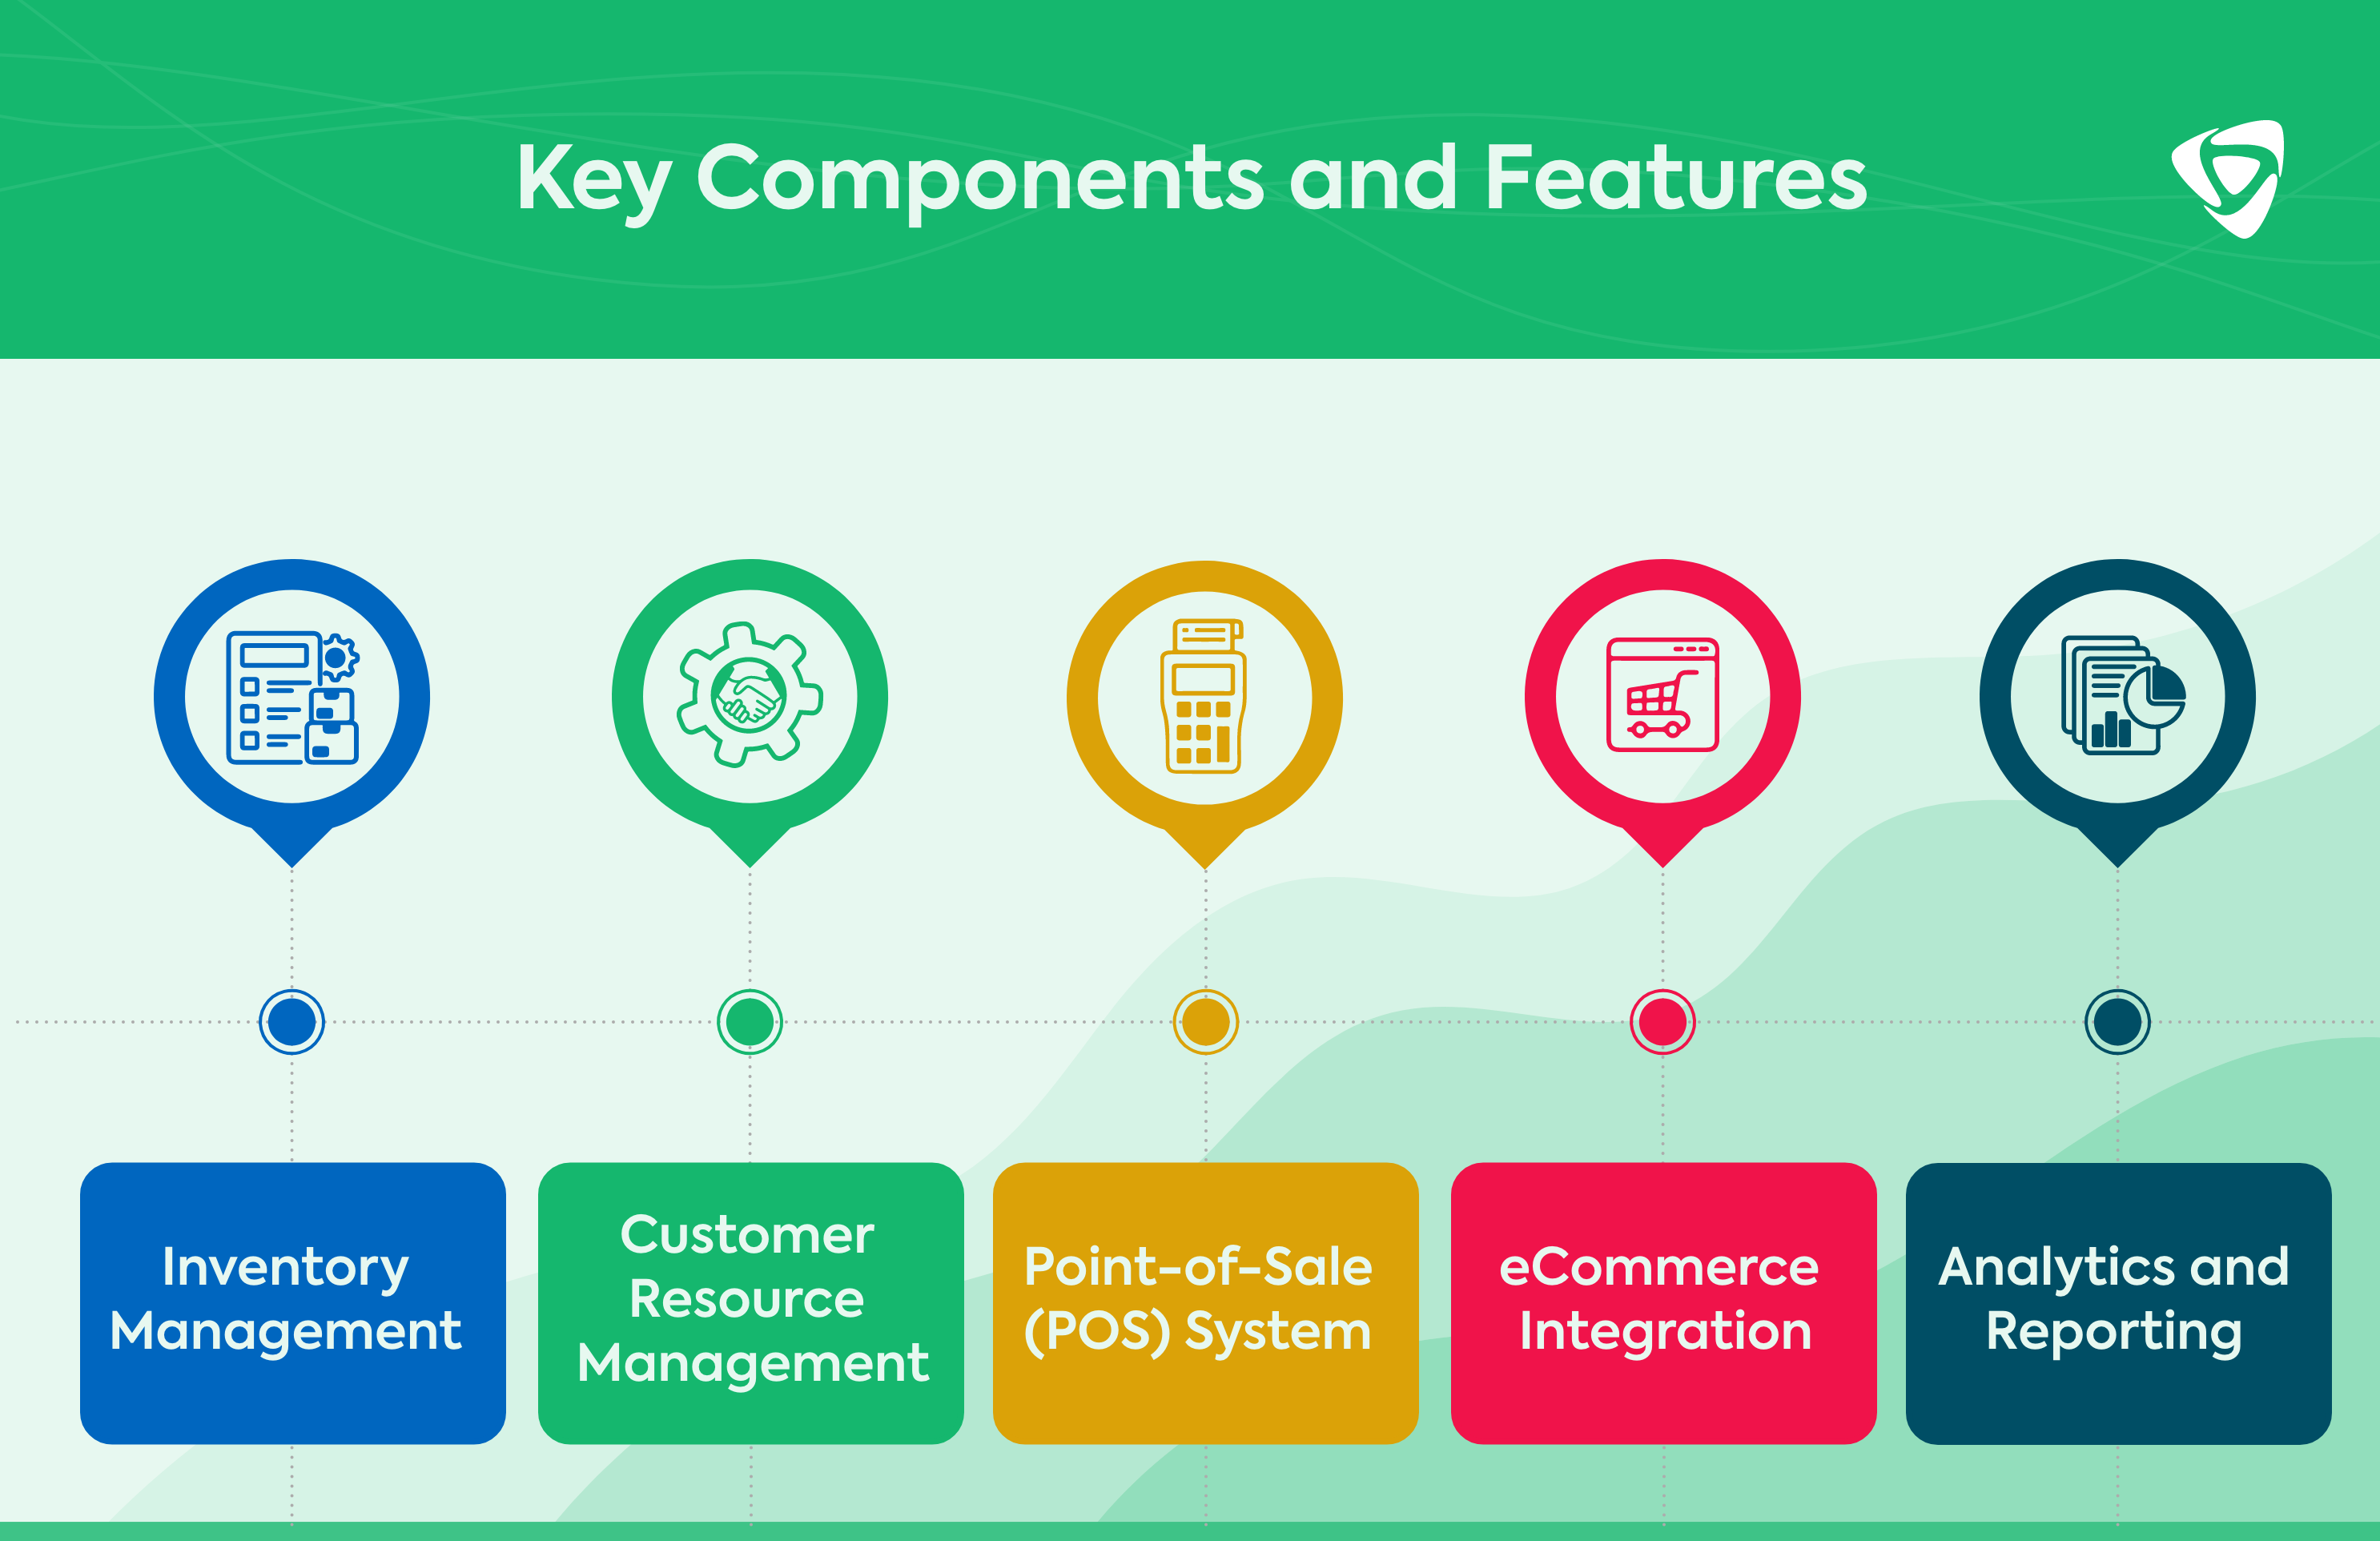 Key Components and Features